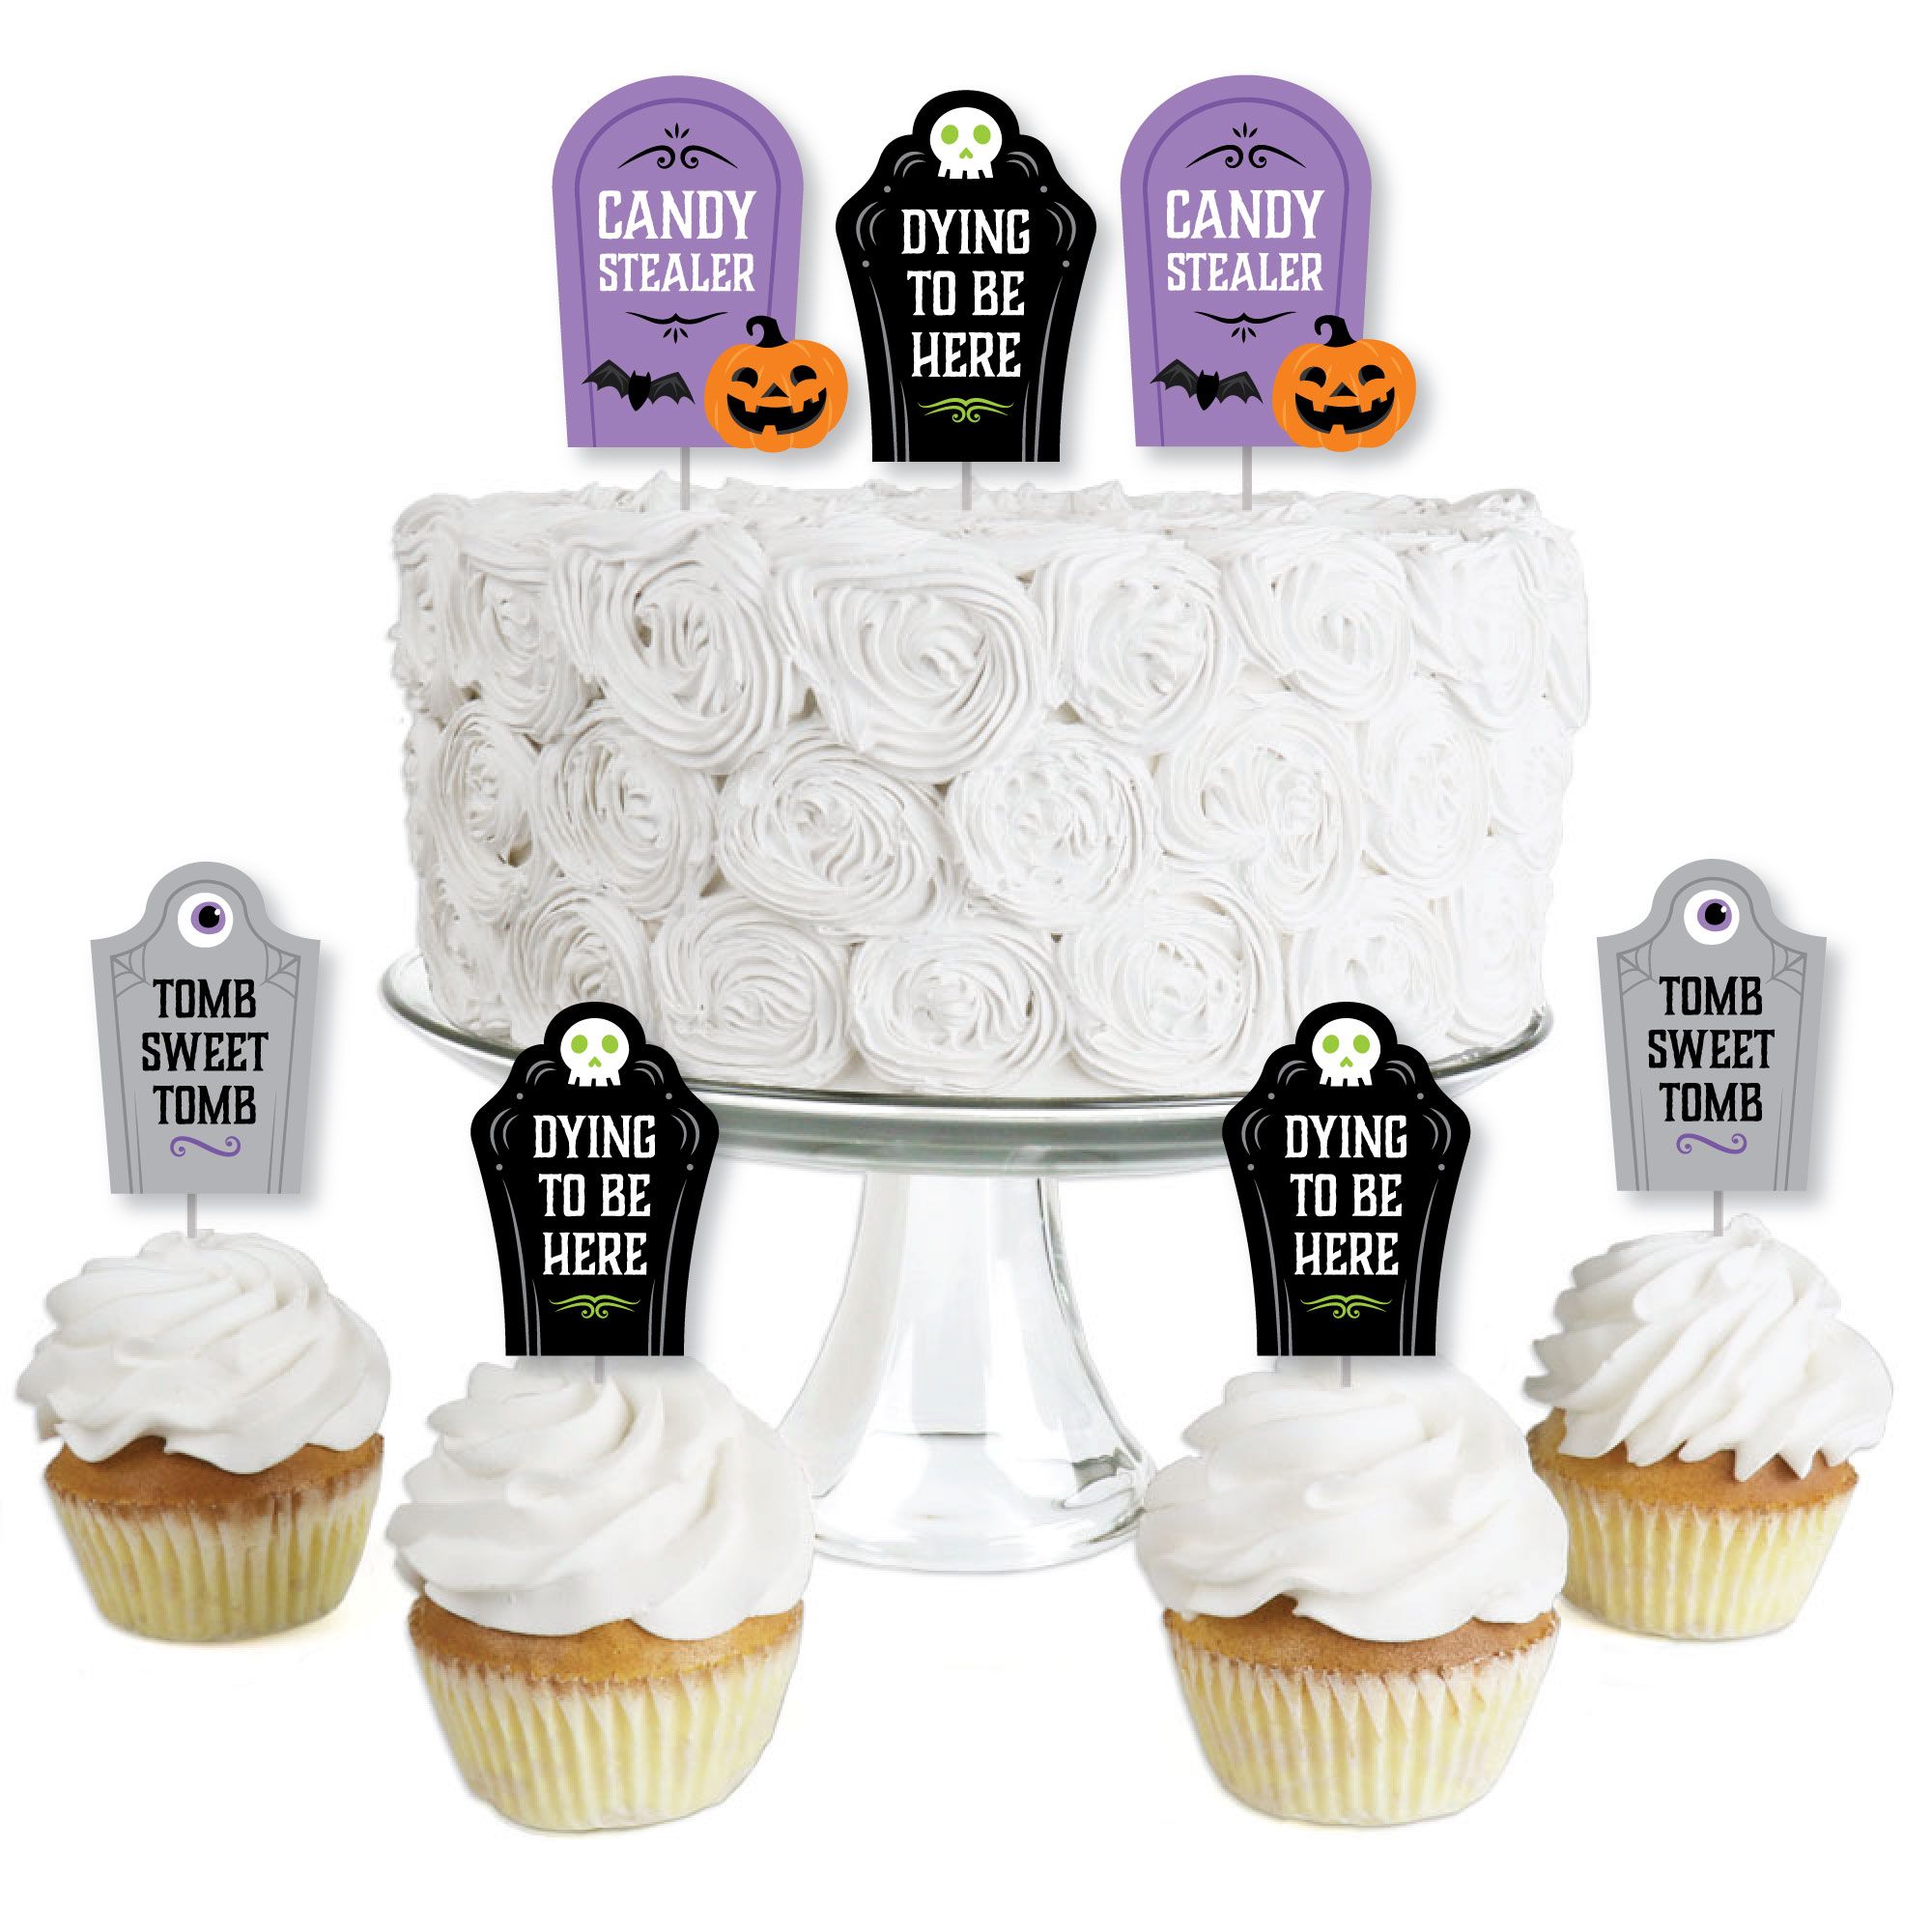 bedbathandbeyond.com | Big Dot of Happiness Cute and Colorful Tombstones - Dessert Cupcake Toppers - Kids Halloween Party Clear Treat Picks - Set of 24